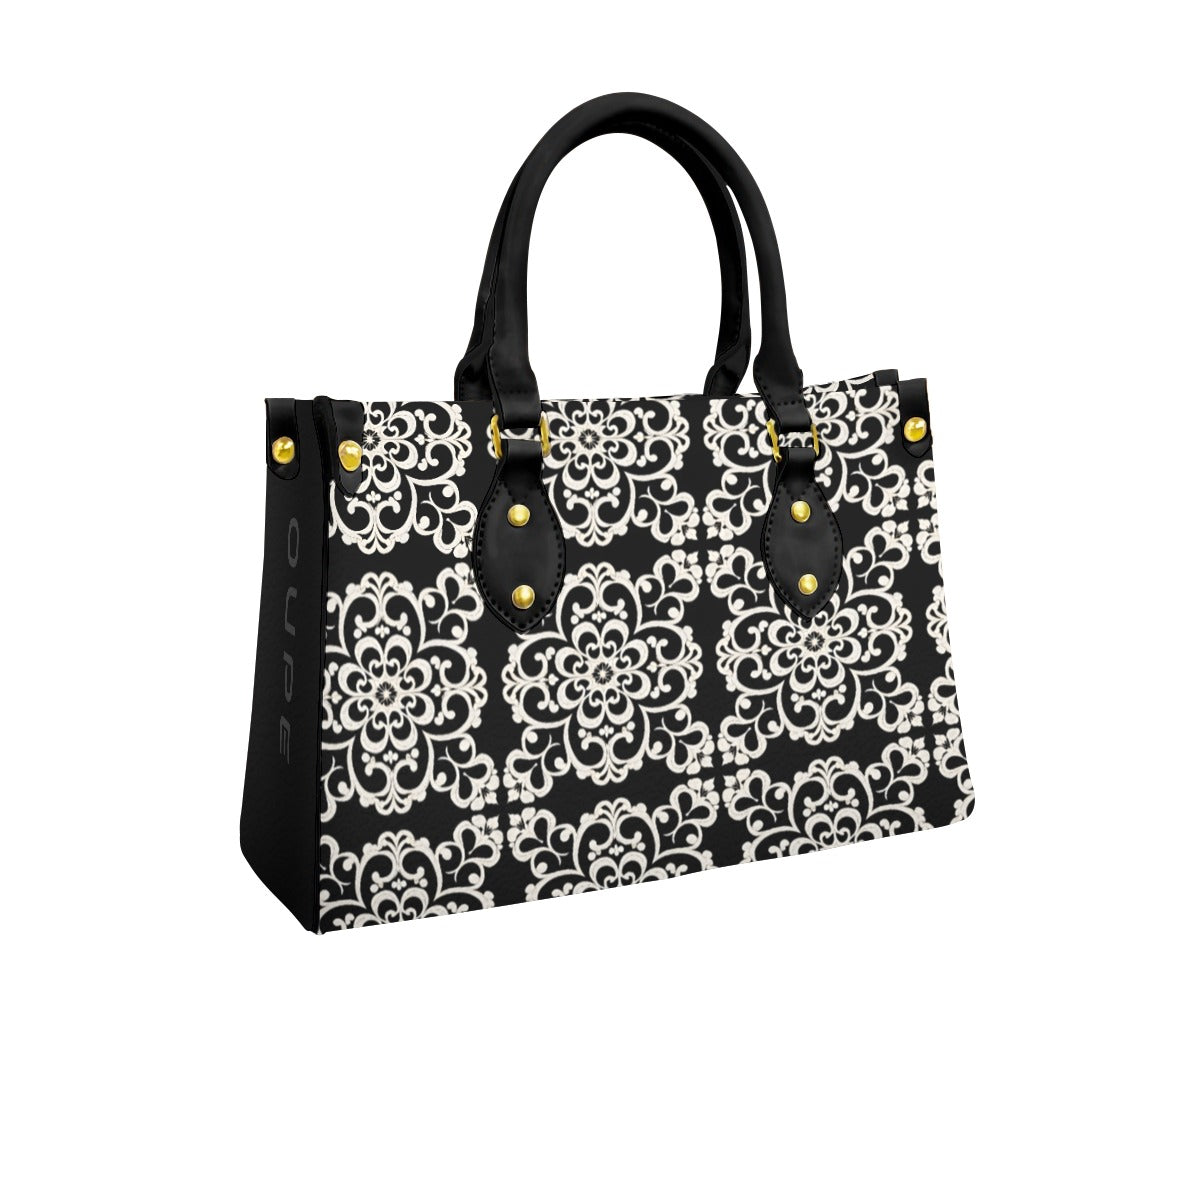 OUPE Women's Tote Bag With Black Handle